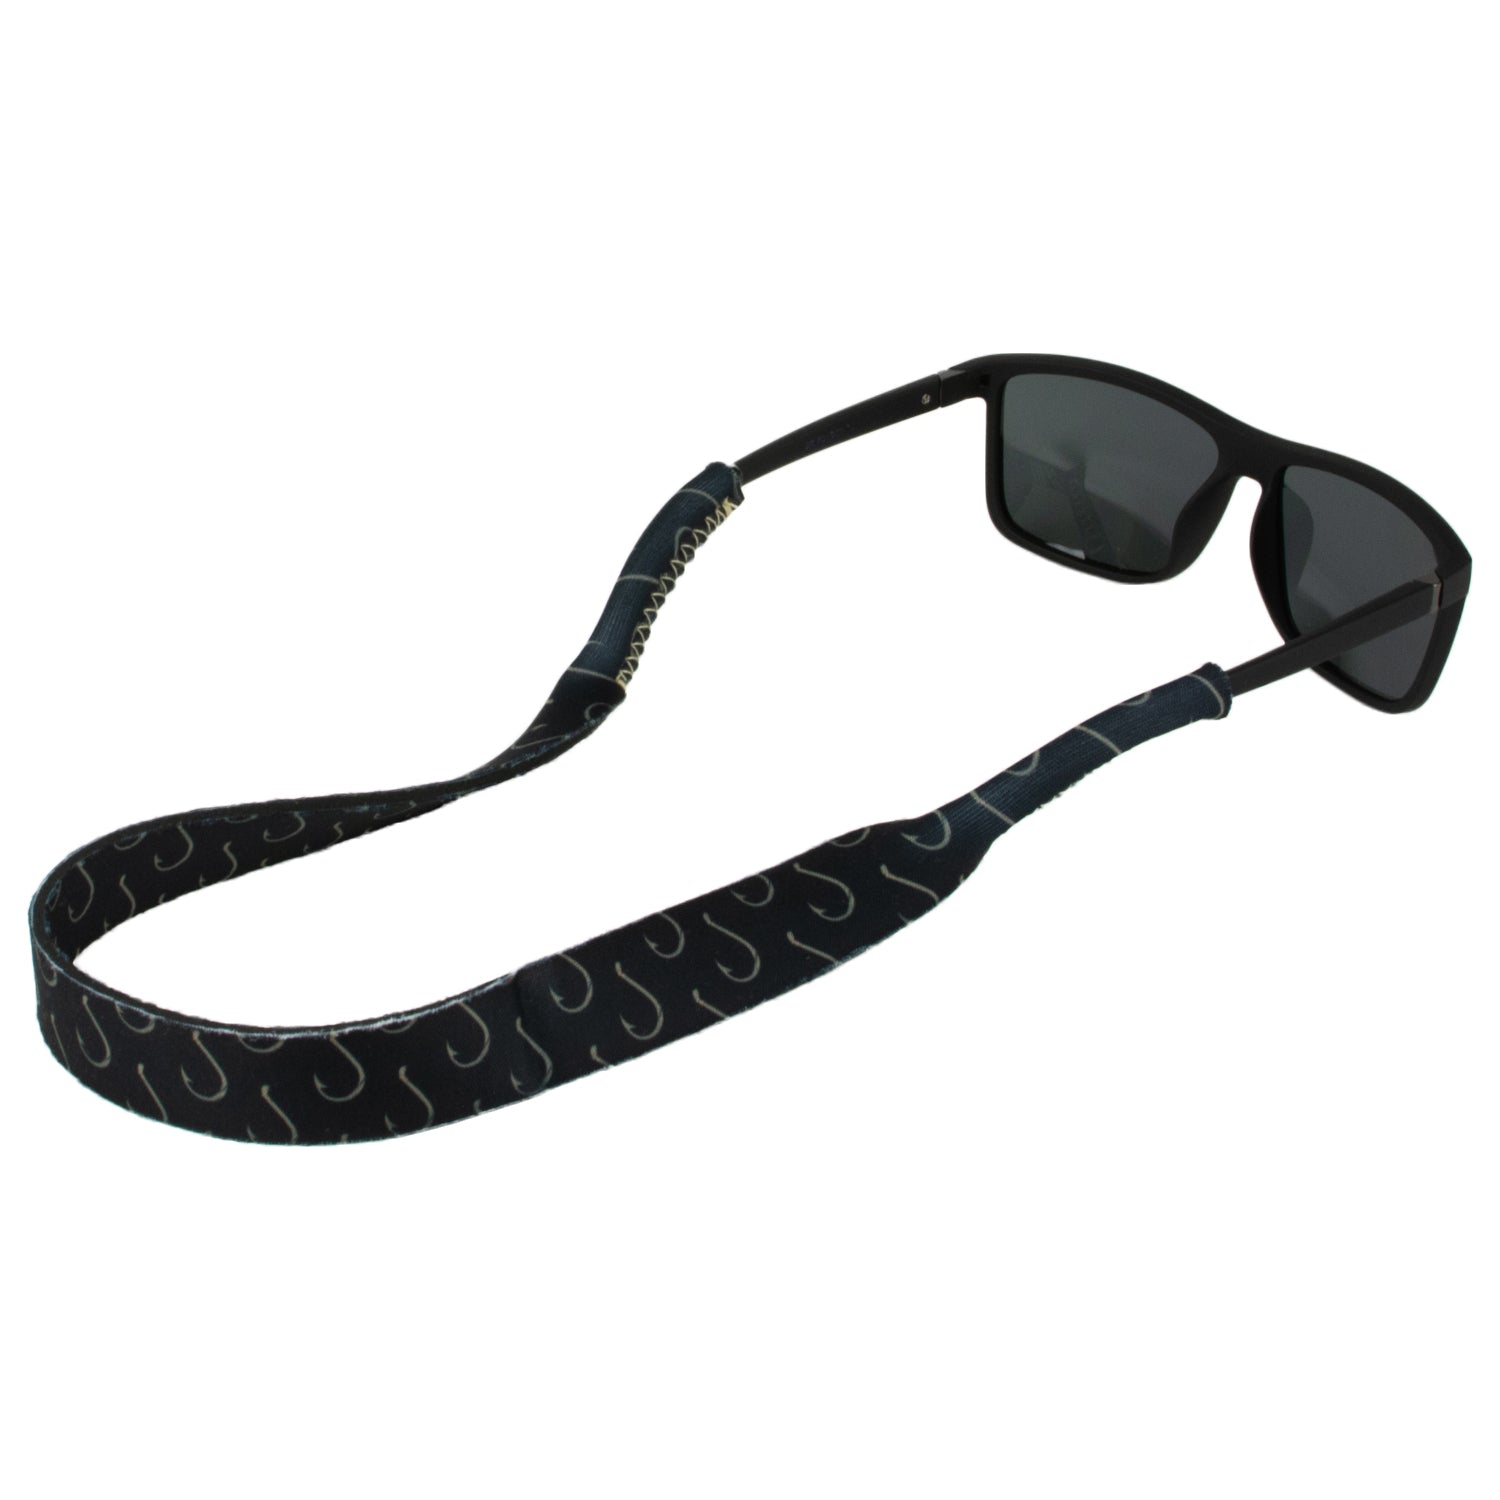 Ukes Premium Sunglass Strap - Durable & Soft Eyewear Retainer Designed with  Floating Neoprene Material - Secure fit for Your Glasses and Eyewear. (The  Strokes) 